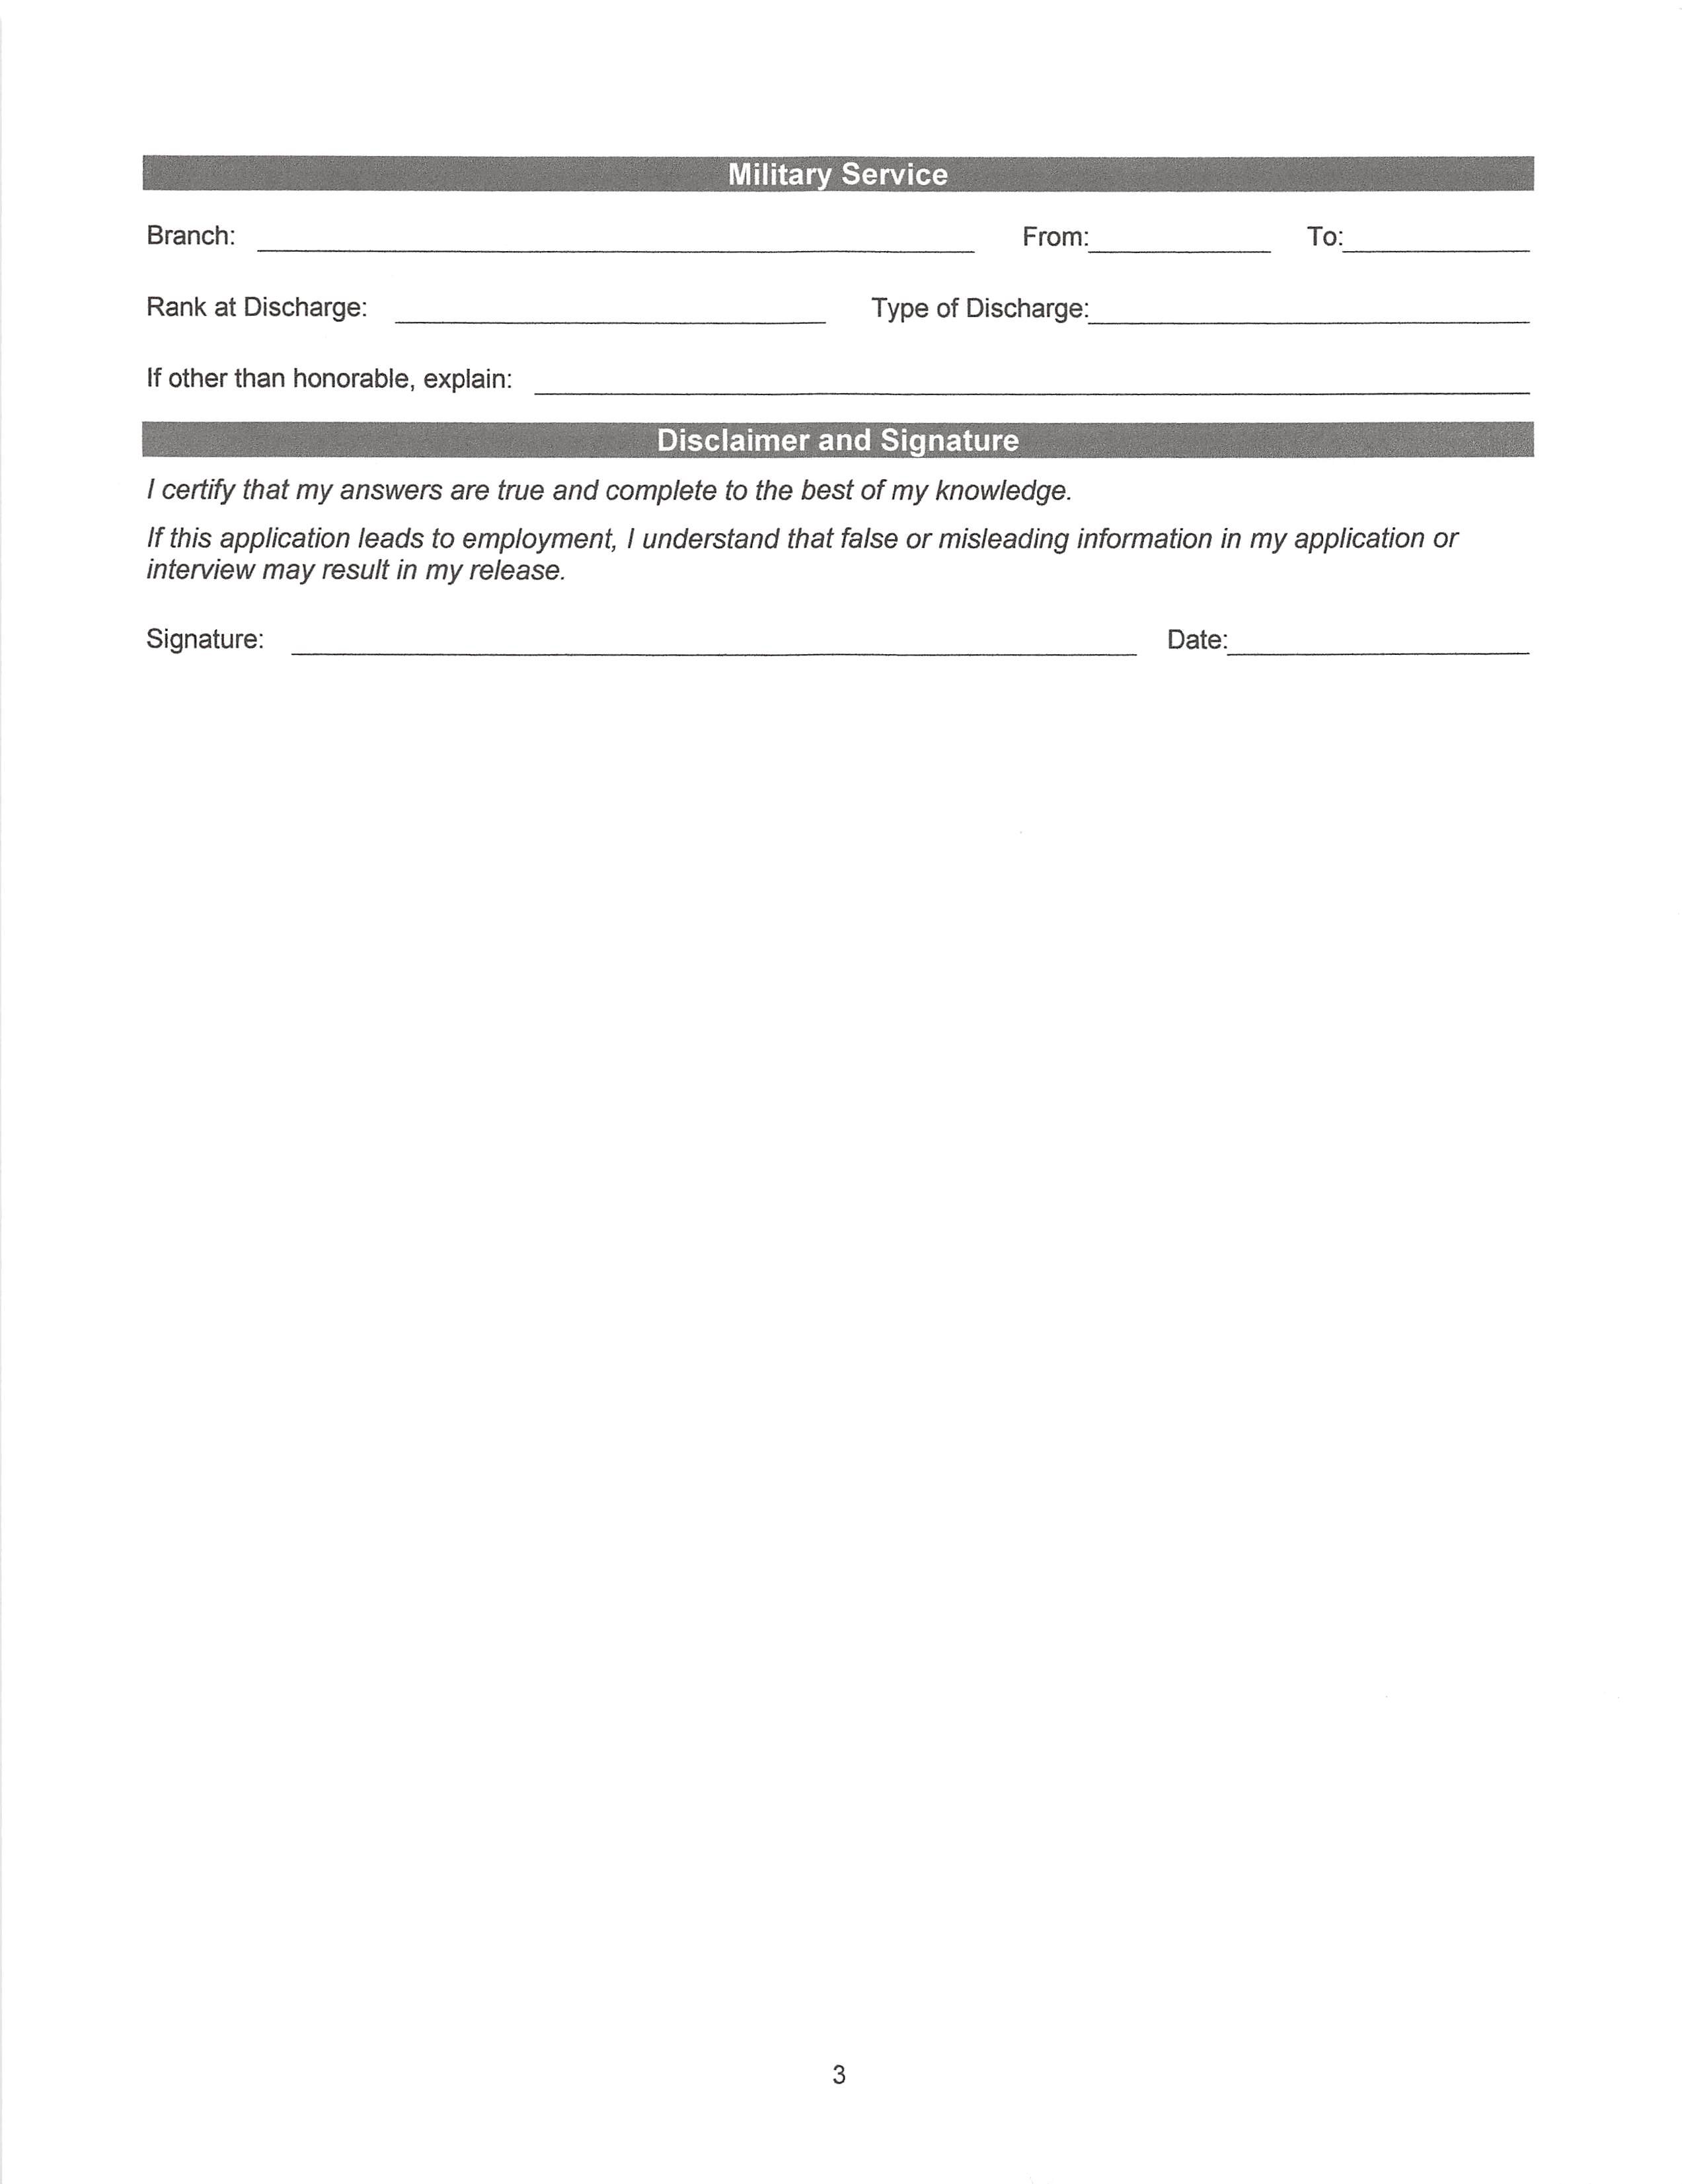 Frames Lawn Care And Snow Removal Employment Application 